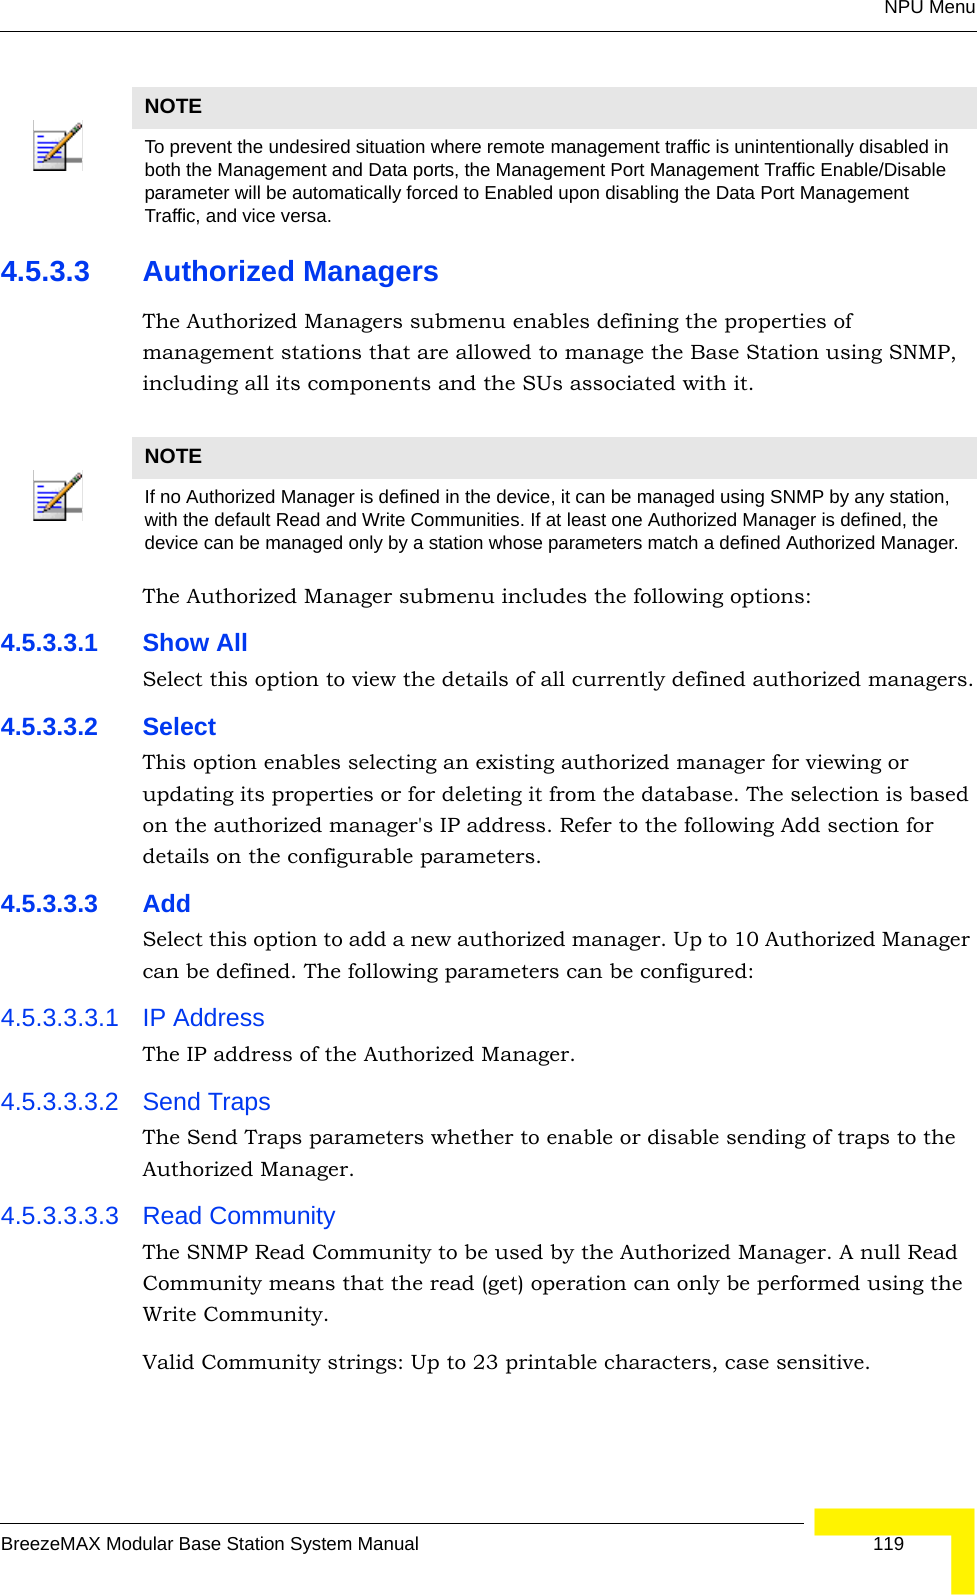 NPU MenuBreezeMAX Modular Base Station System Manual 1194.5.3.3 Authorized ManagersThe Authorized Managers submenu enables defining the properties of management stations that are allowed to manage the Base Station using SNMP, including all its components and the SUs associated with it.The Authorized Manager submenu includes the following options:4.5.3.3.1 Show AllSelect this option to view the details of all currently defined authorized managers.4.5.3.3.2 SelectThis option enables selecting an existing authorized manager for viewing or updating its properties or for deleting it from the database. The selection is based on the authorized manager&apos;s IP address. Refer to the following Add section for details on the configurable parameters.4.5.3.3.3 AddSelect this option to add a new authorized manager. Up to 10 Authorized Manager can be defined. The following parameters can be configured:4.5.3.3.3.1 IP AddressThe IP address of the Authorized Manager.4.5.3.3.3.2 Send TrapsThe Send Traps parameters whether to enable or disable sending of traps to the Authorized Manager.4.5.3.3.3.3 Read CommunityThe SNMP Read Community to be used by the Authorized Manager. A null Read Community means that the read (get) operation can only be performed using the Write Community.Valid Community strings: Up to 23 printable characters, case sensitive.NOTETo prevent the undesired situation where remote management traffic is unintentionally disabled in both the Management and Data ports, the Management Port Management Traffic Enable/Disable parameter will be automatically forced to Enabled upon disabling the Data Port Management Traffic, and vice versa.NOTEIf no Authorized Manager is defined in the device, it can be managed using SNMP by any station, with the default Read and Write Communities. If at least one Authorized Manager is defined, the device can be managed only by a station whose parameters match a defined Authorized Manager.